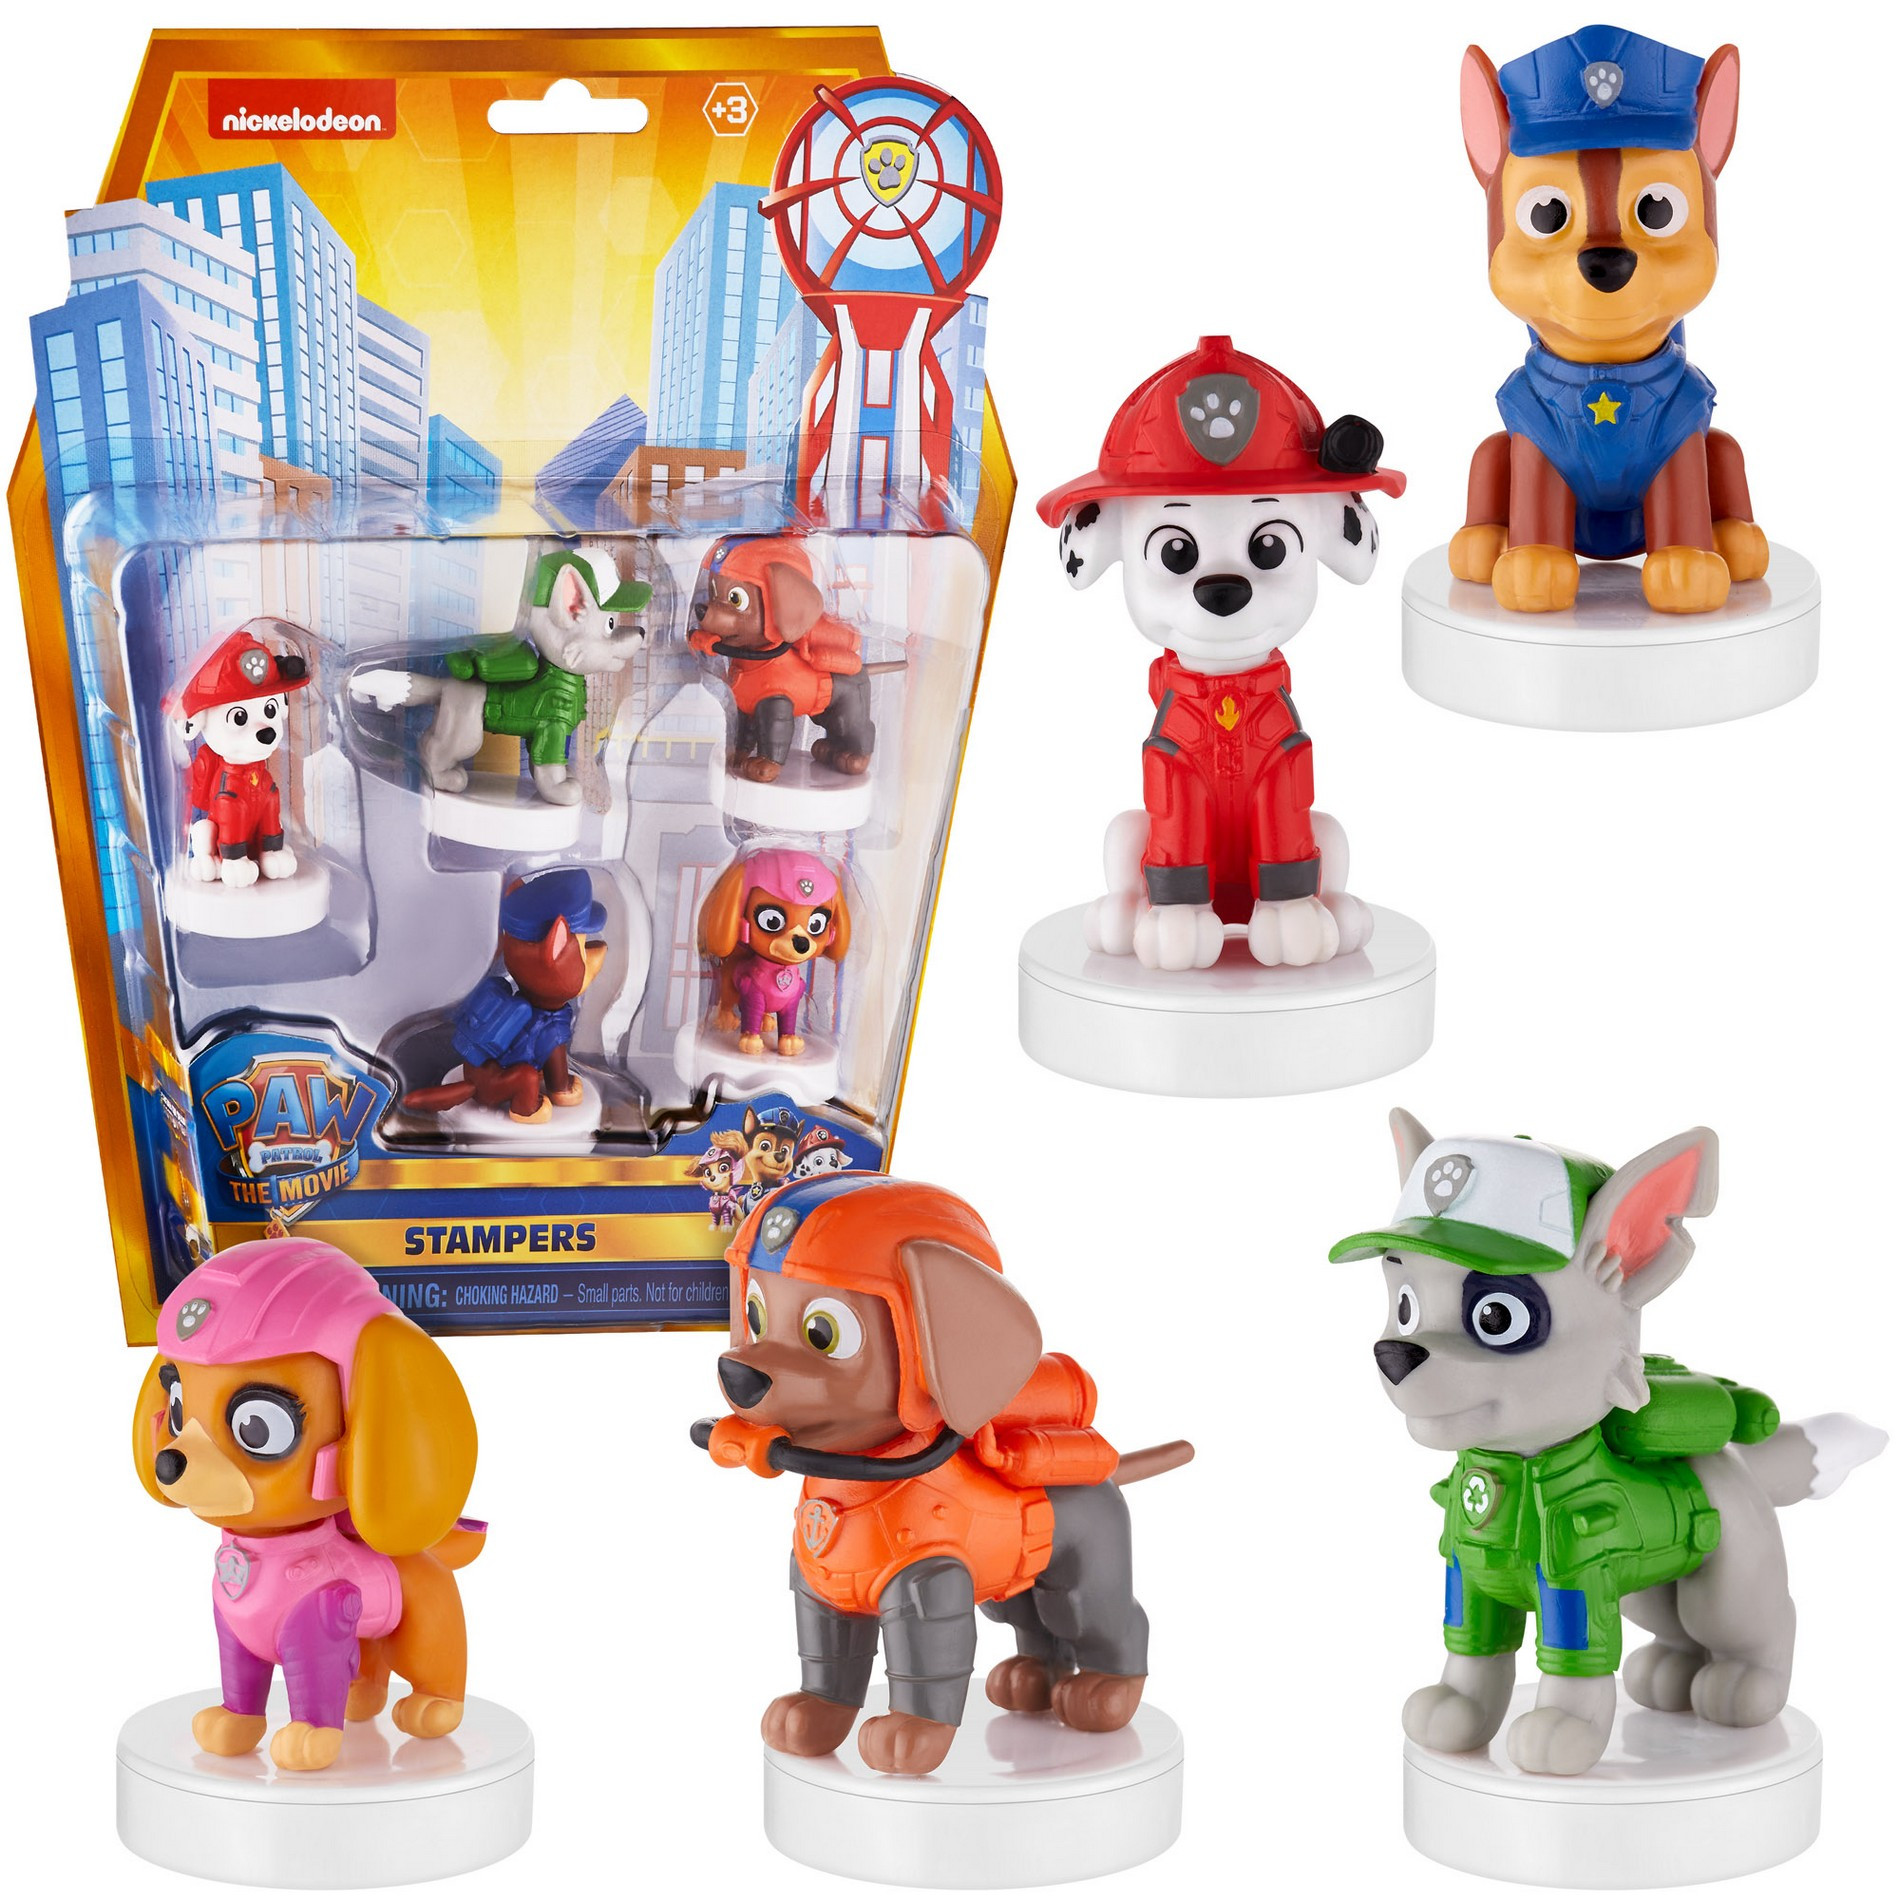 Set of 5 Paw Patrol figures with a stamp